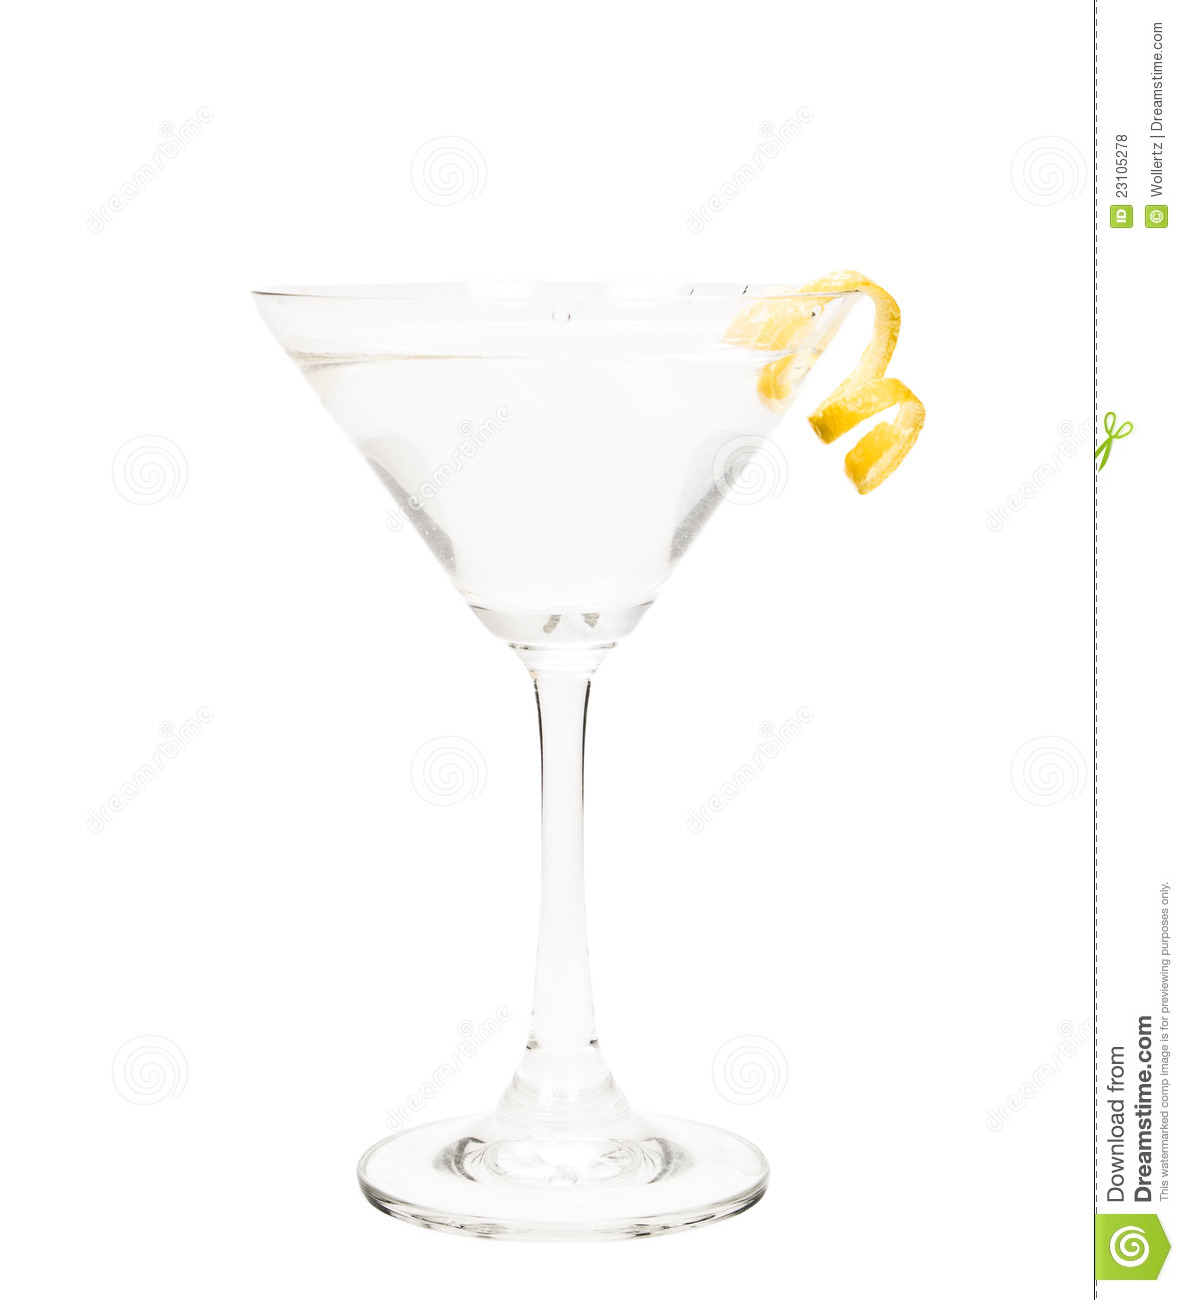 Isolated Martini With A Lemon Twist Royalty Free Stock Photos   Image    